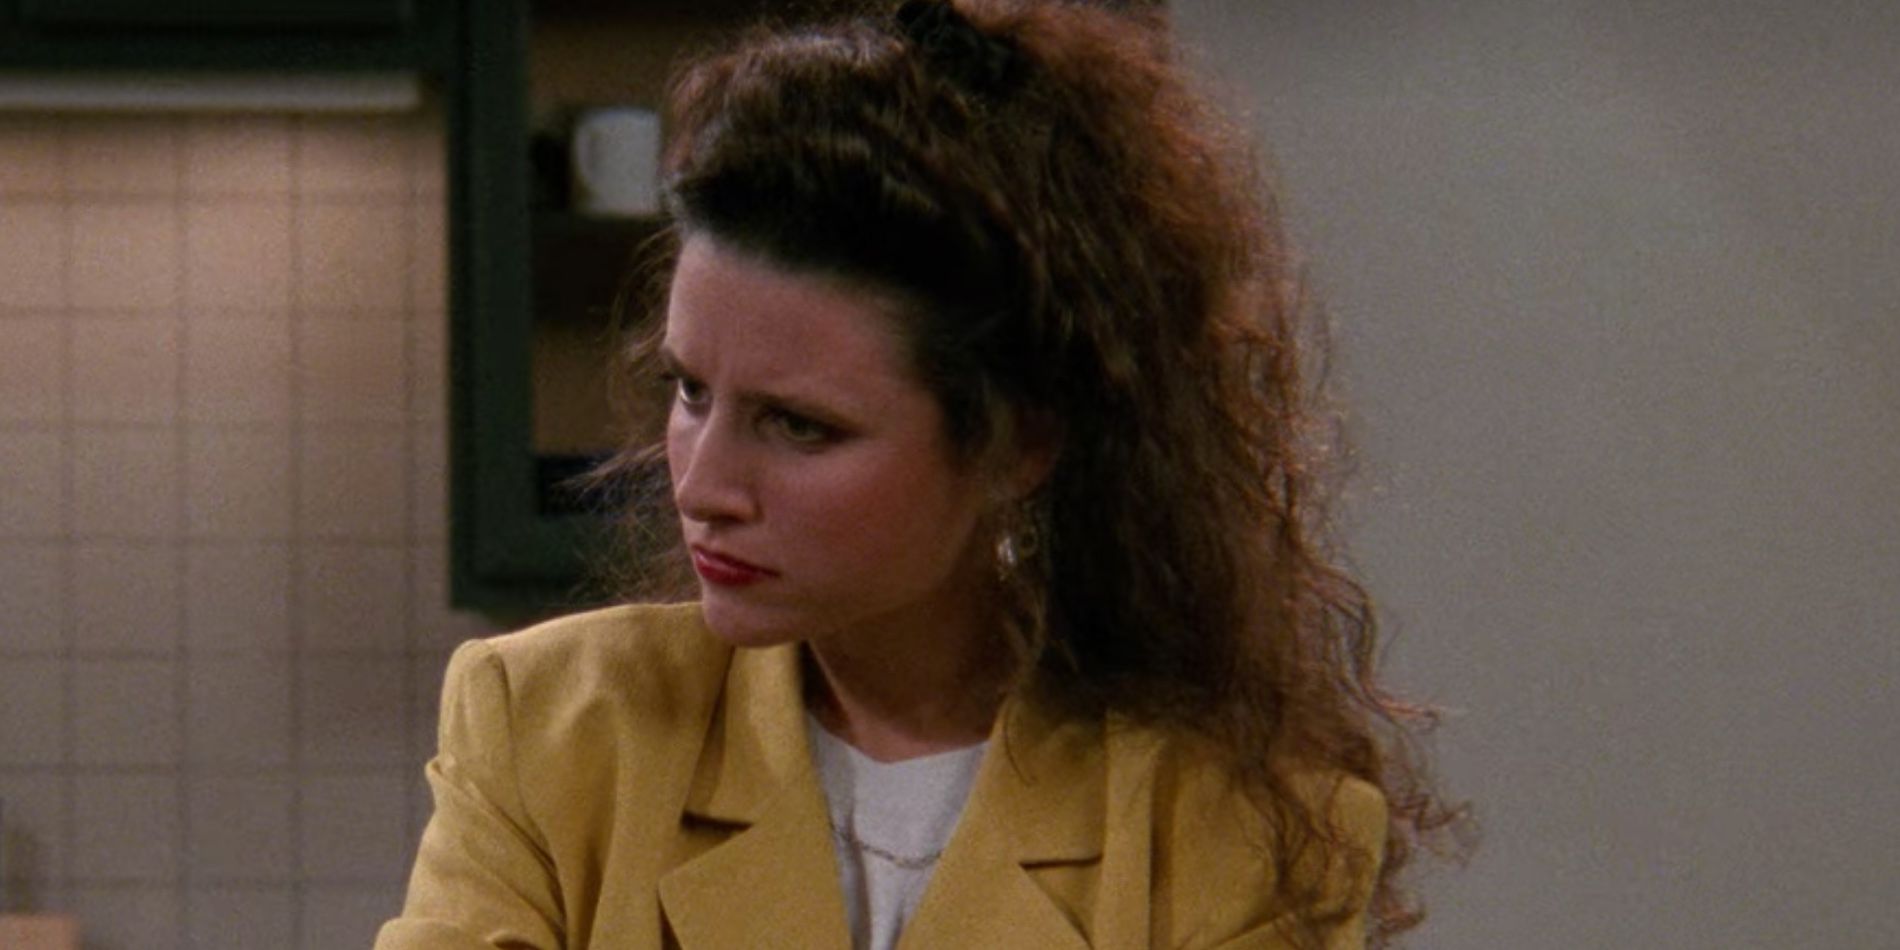 The First Seinfeld Episode Elaine Wasnt In (& Why)